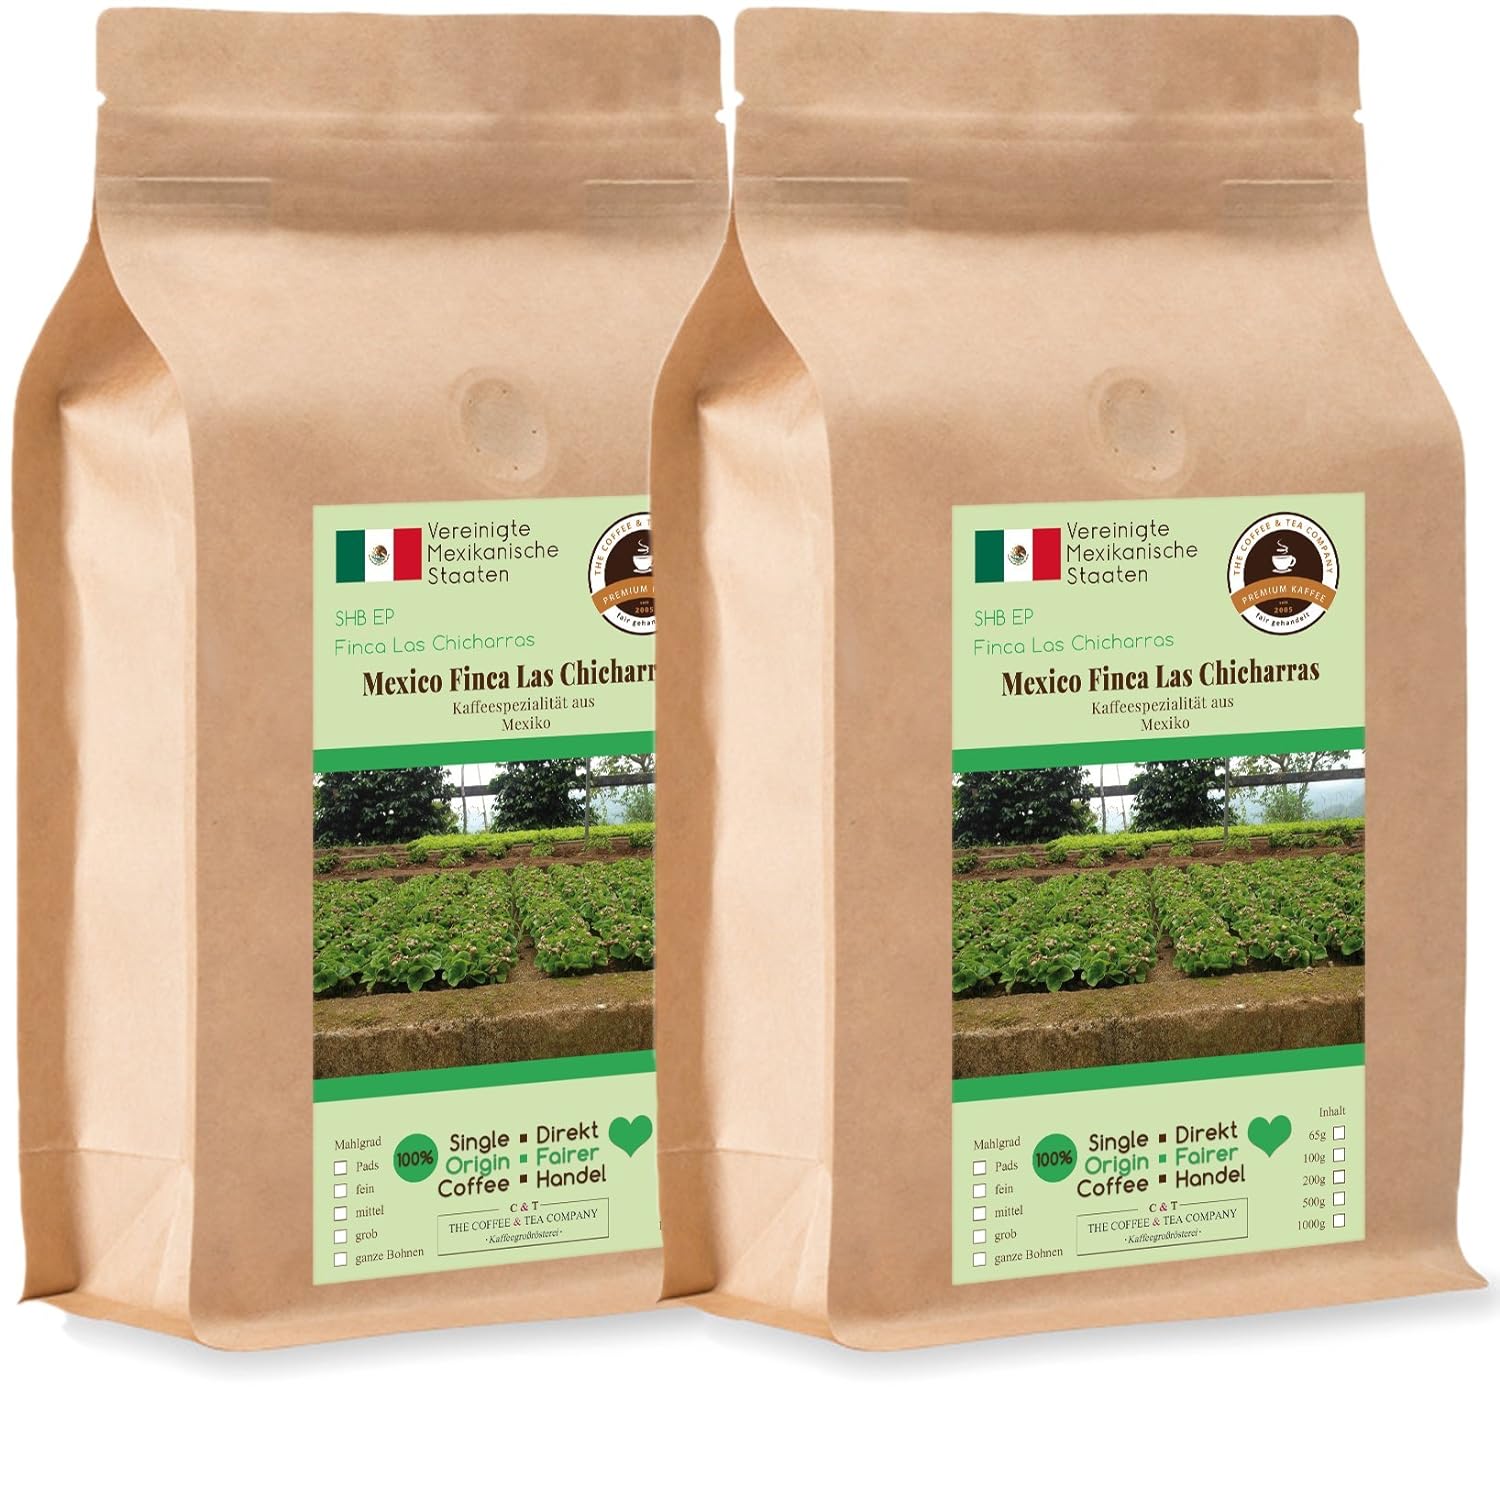 Coffee Globetrotter - Coffee with Heart - Mexico Finca Las Chicarras - 2 x 1000 g Very Fine Ground - for Fully Automatic Coffee Grinder - Roasted Coffee Fair Trade | Refill Pack Economy Pack